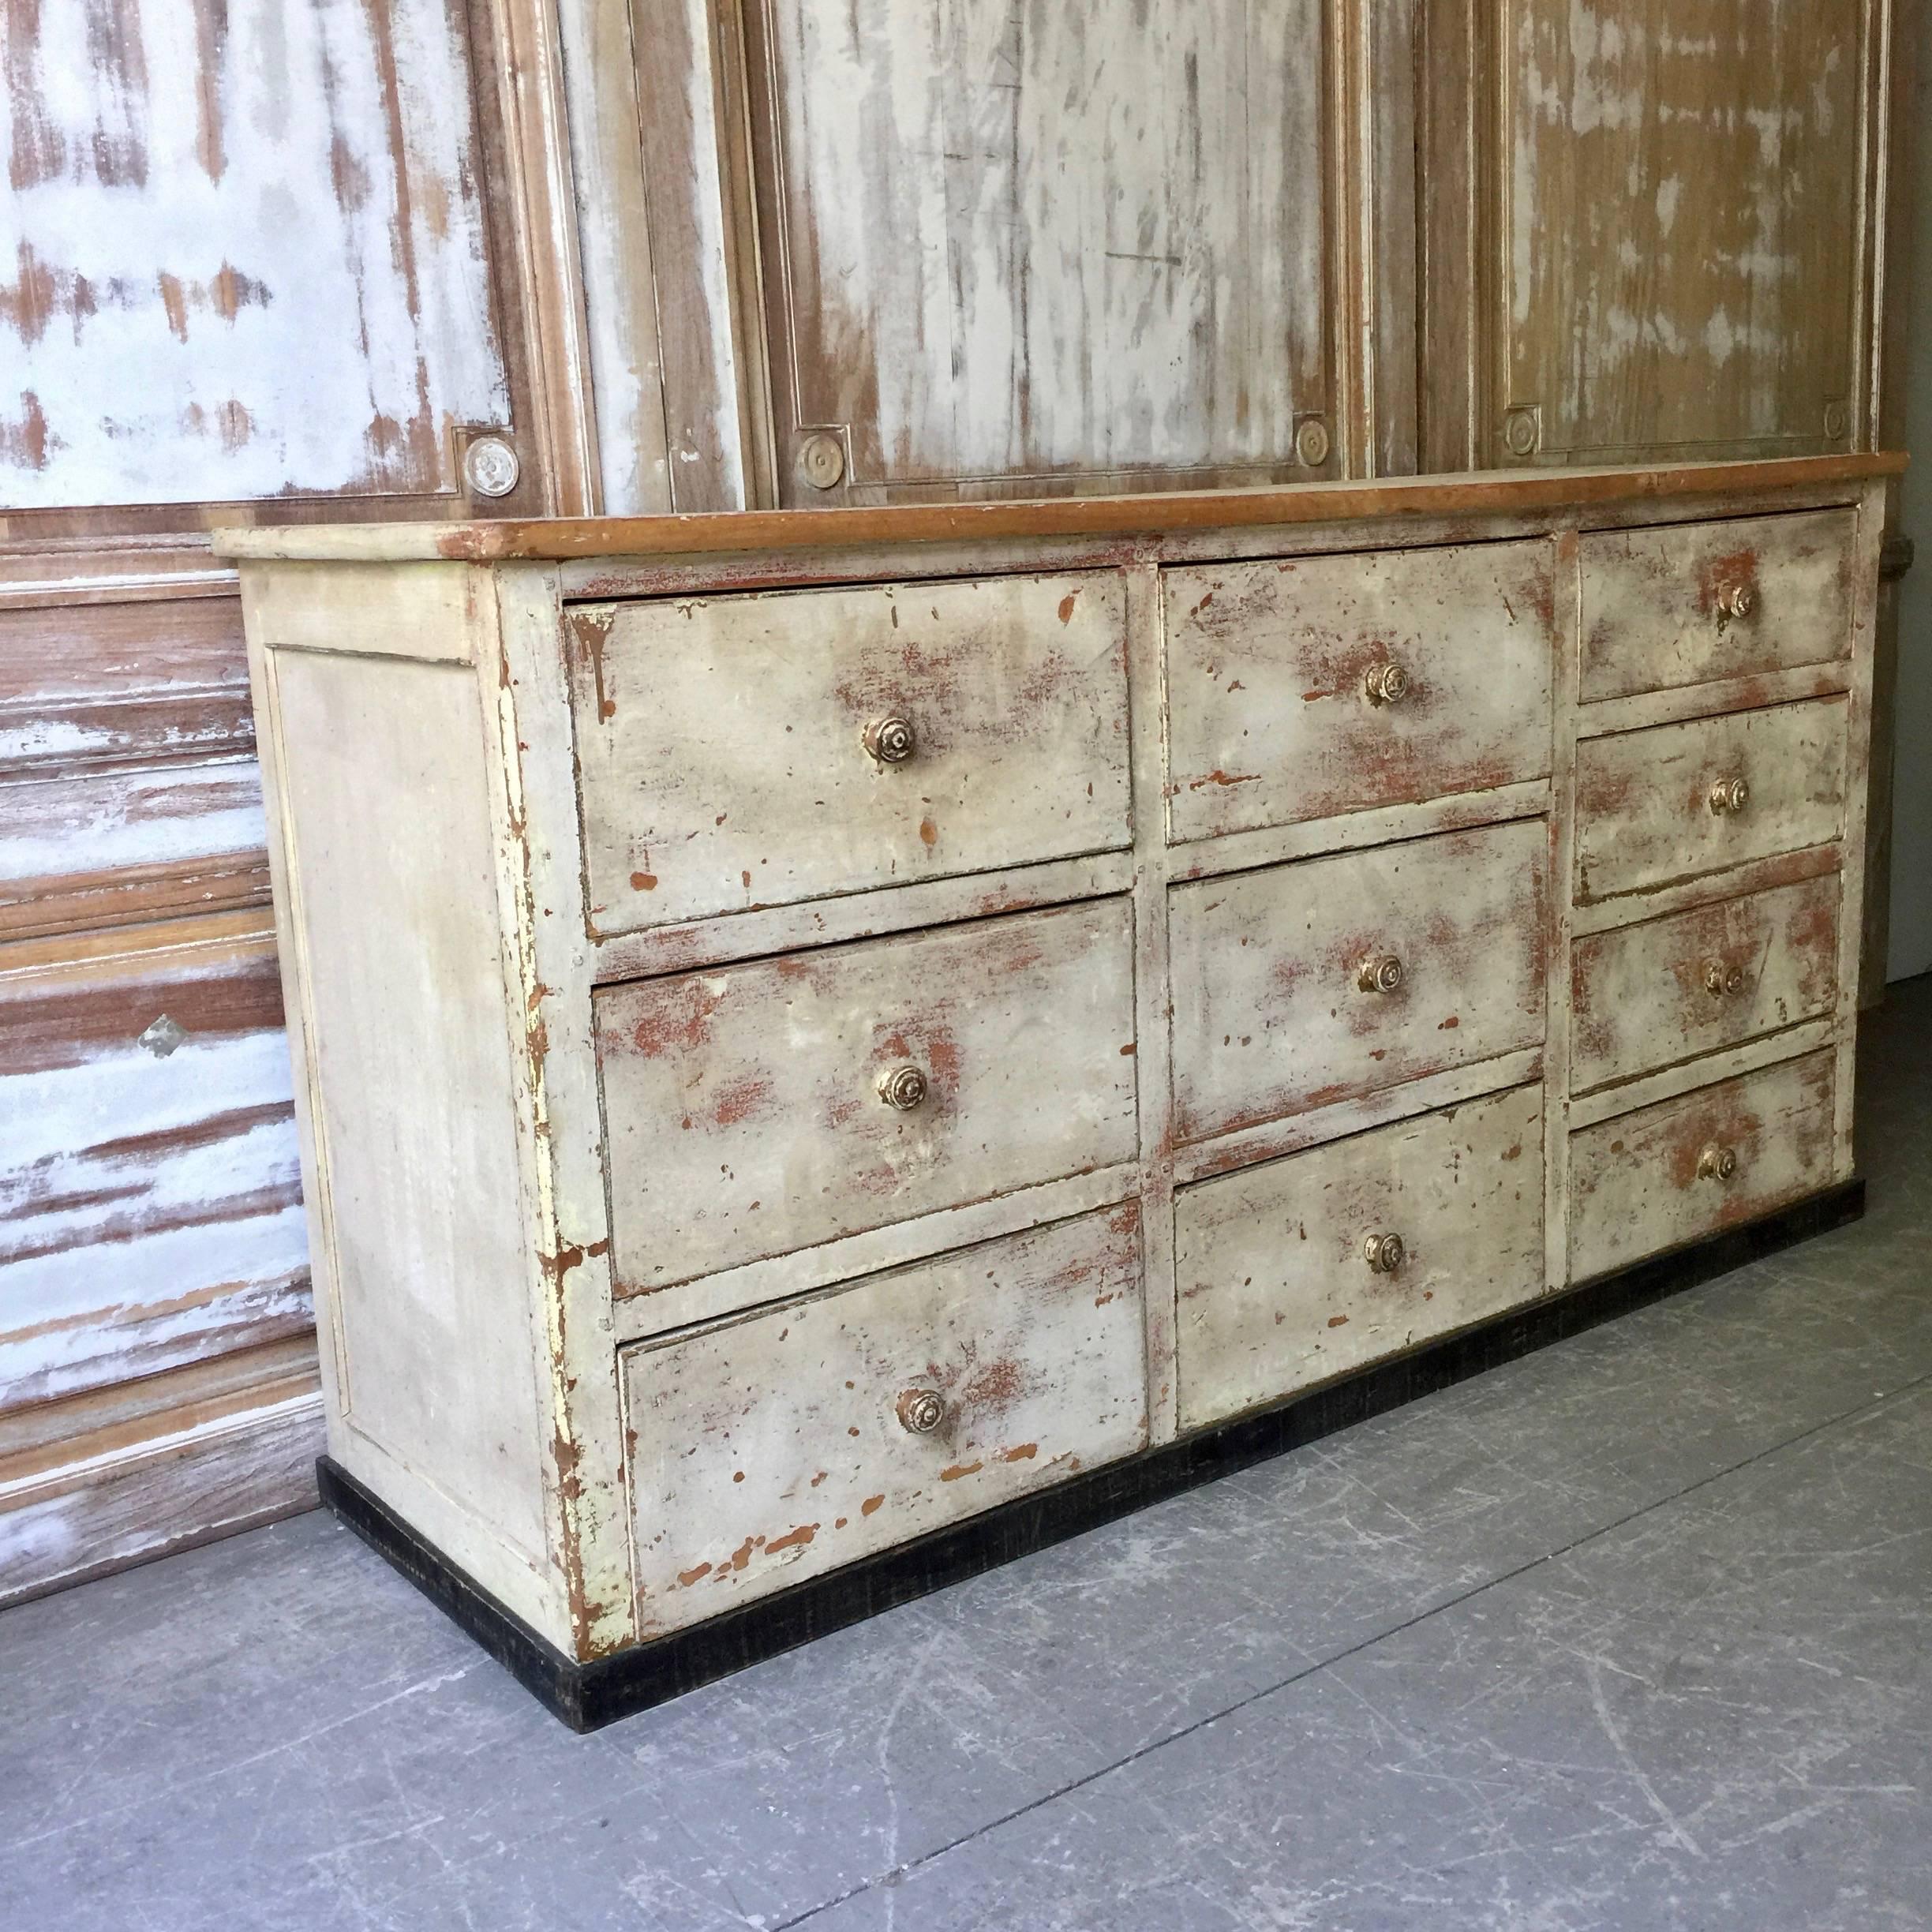 A large 19th century sales counter/commode with ten drawers in superb old patina, France, circa 1860-1880.
Surprising pieces and objects, authentic, decorative and rare items. Discover them all.